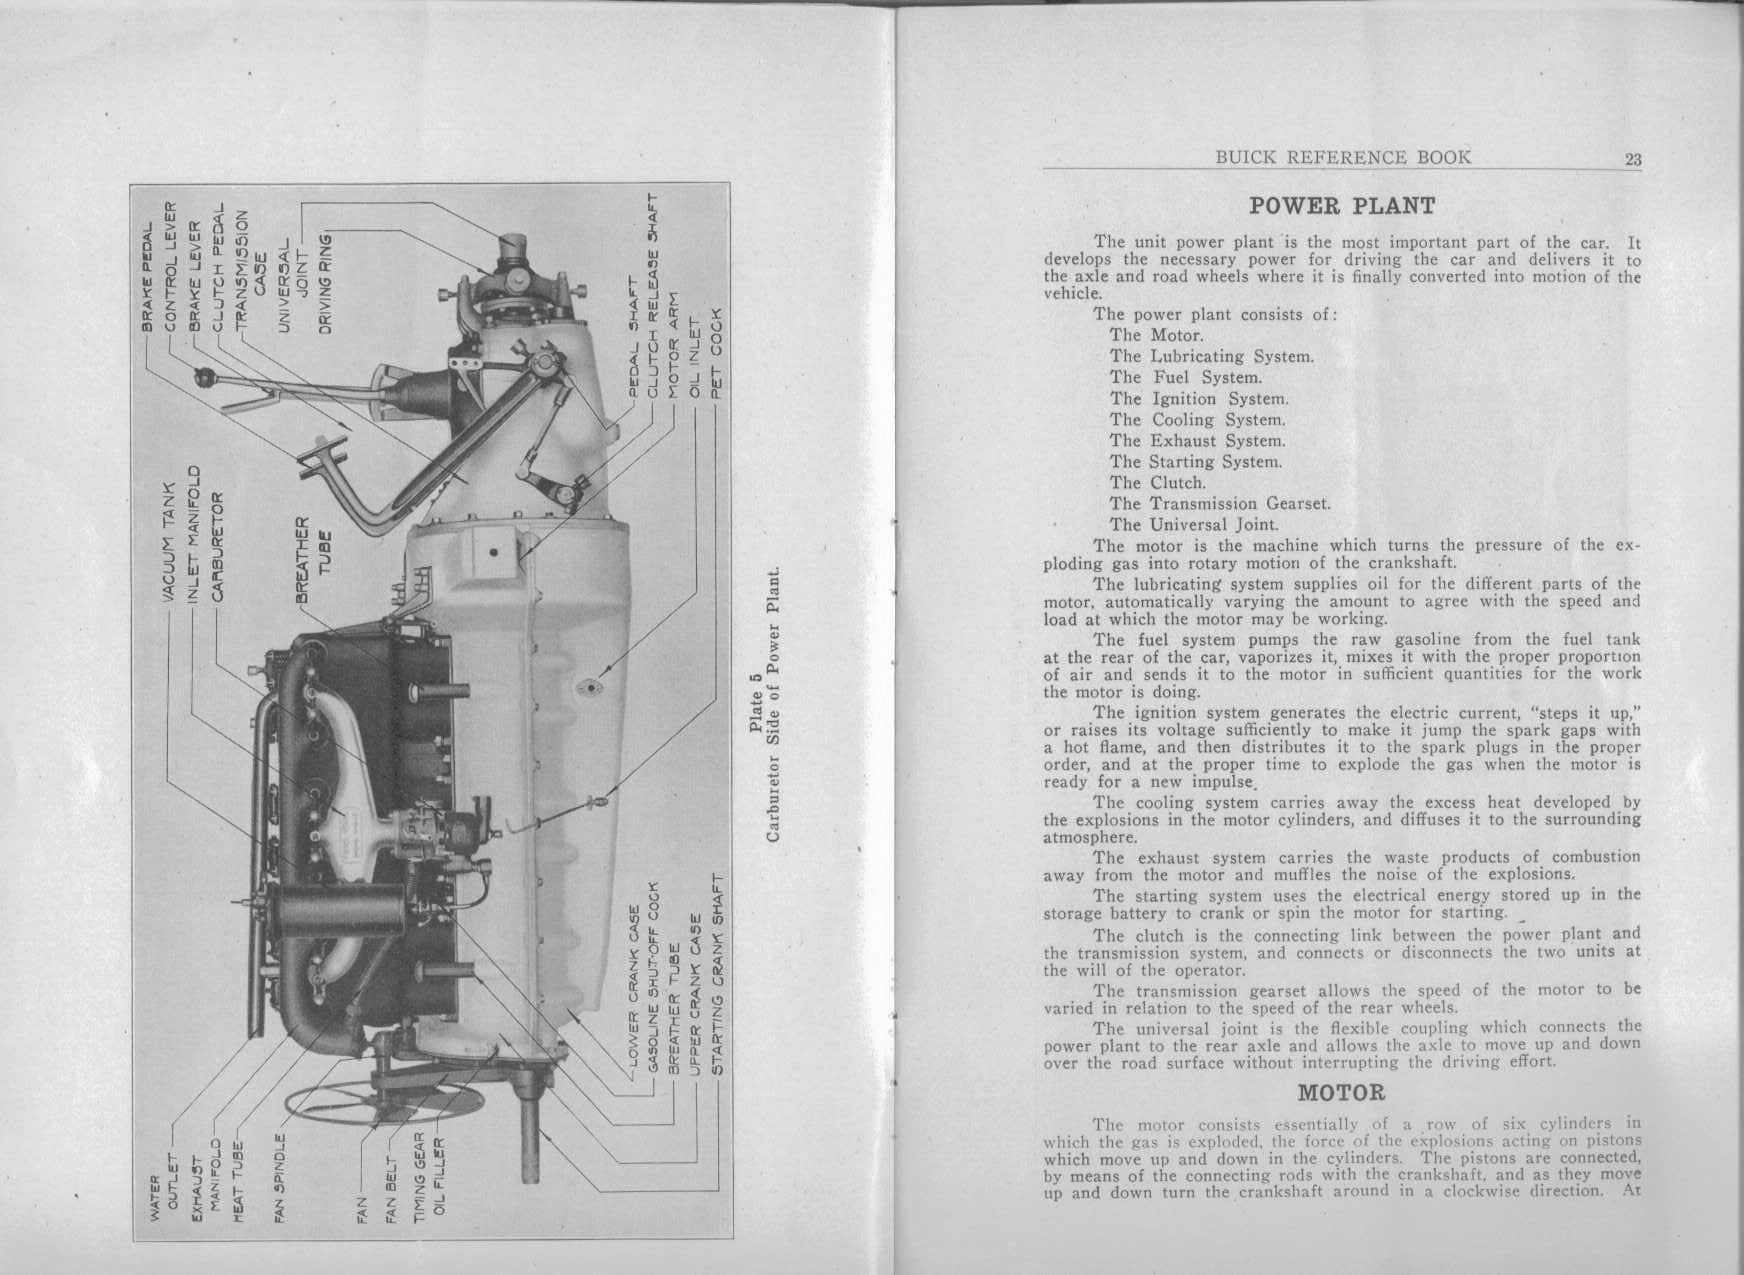 1916 Buick Reference Book-22-23